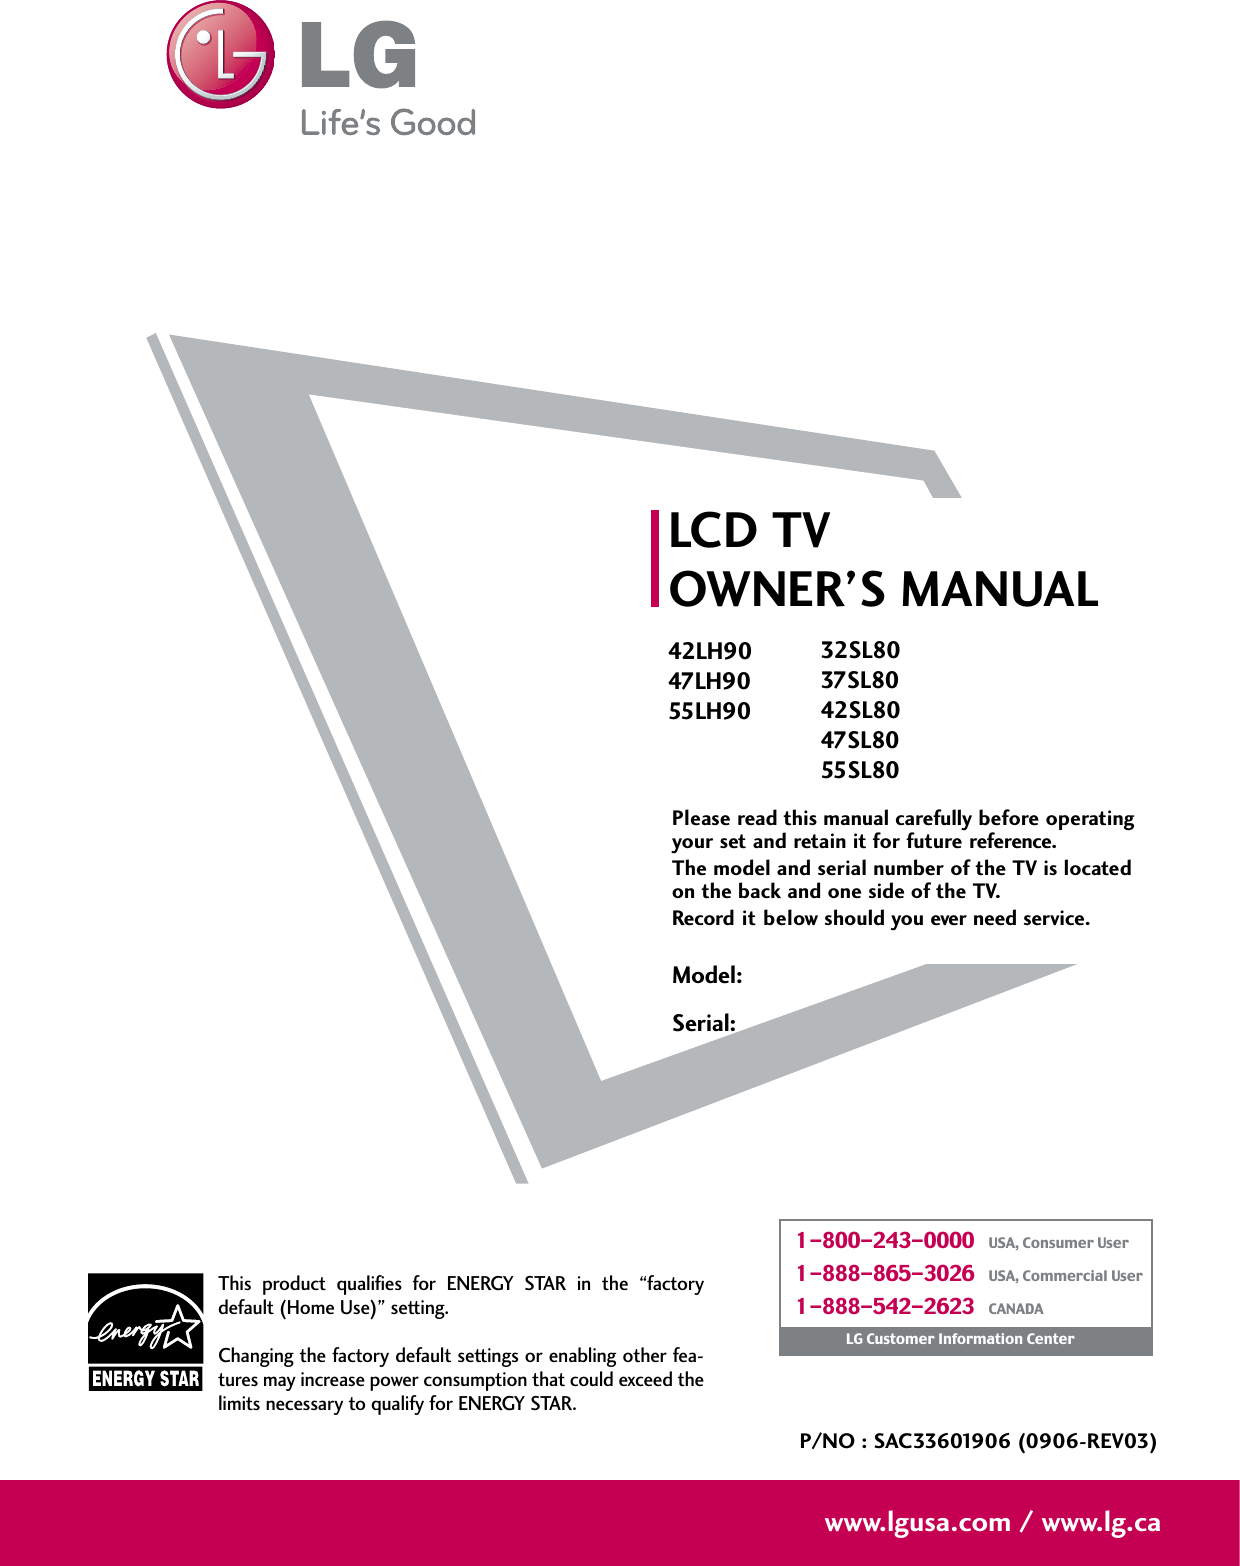 Please read this manual carefully before operatingyour set and retain it for future reference.The model and serial number of the TV is locatedon the back and one side of the TV. Record it below should you ever need service.LCD TVOWNER’S MANUAL42LH9047LH9055LH90P/NO : SAC33601906 (0906-REV03)www.lgusa.com / www.lg.caThis  product  qualifies  for  ENERGY  STAR  in  the  “factorydefault (Home Use)” setting.Changing the factory default settings or enabling other fea-tures may increase power consumption that could exceed thelimits necessary to qualify for ENERGY STAR.Model:Serial:1-800-243-0000   USA, Consumer User1-888-865-3026   USA, Commercial User1-888-542-2623   CANADALG Customer Information Center32SL8037SL8042SL8047SL8055SL80